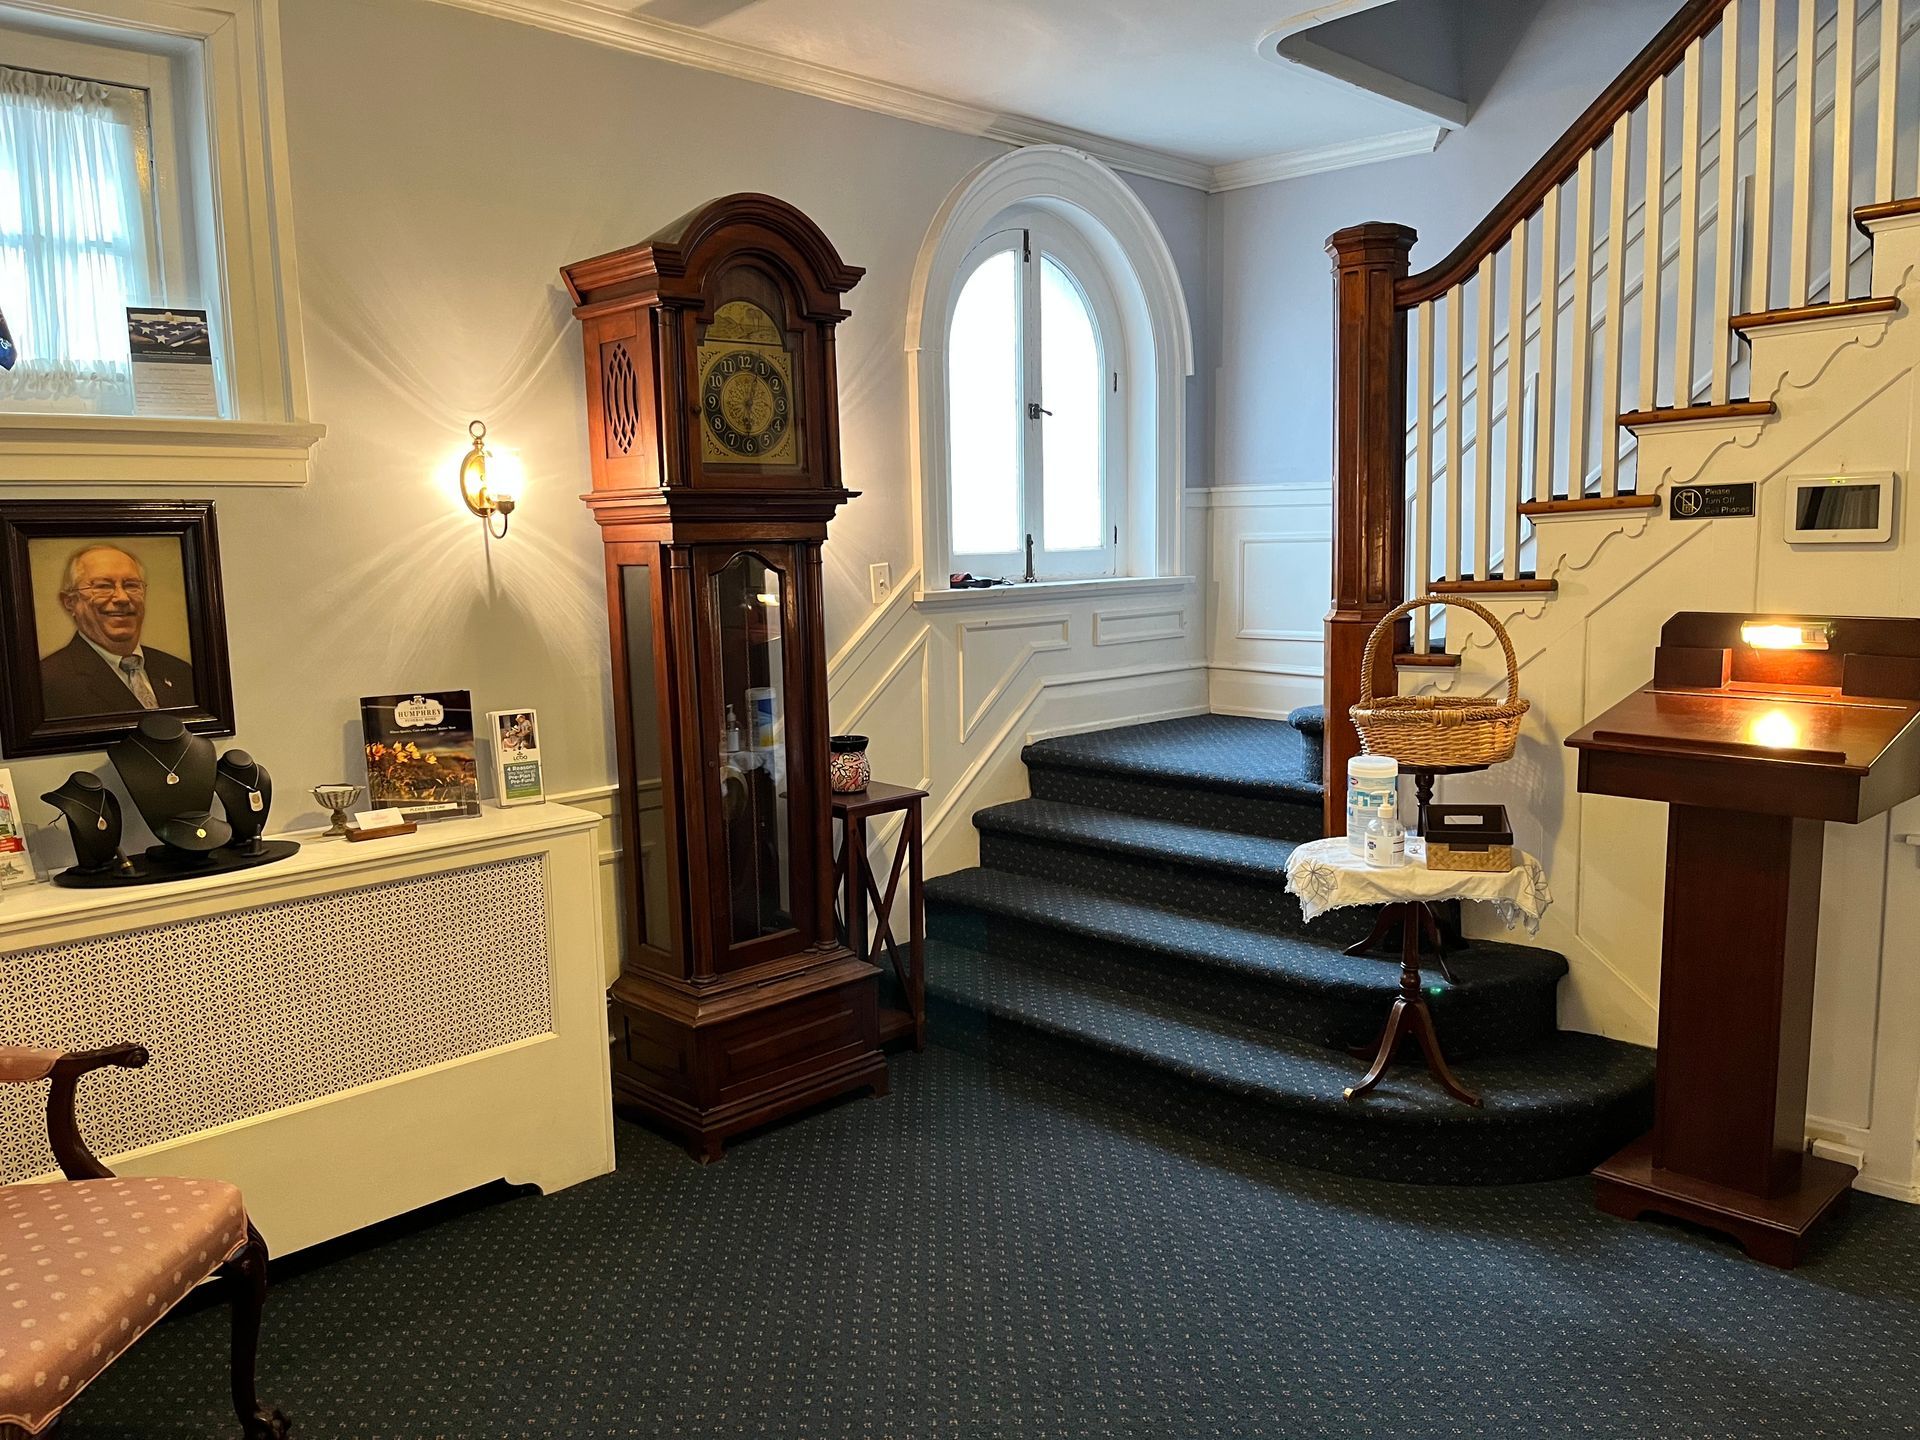 a room with stairs and a large clock